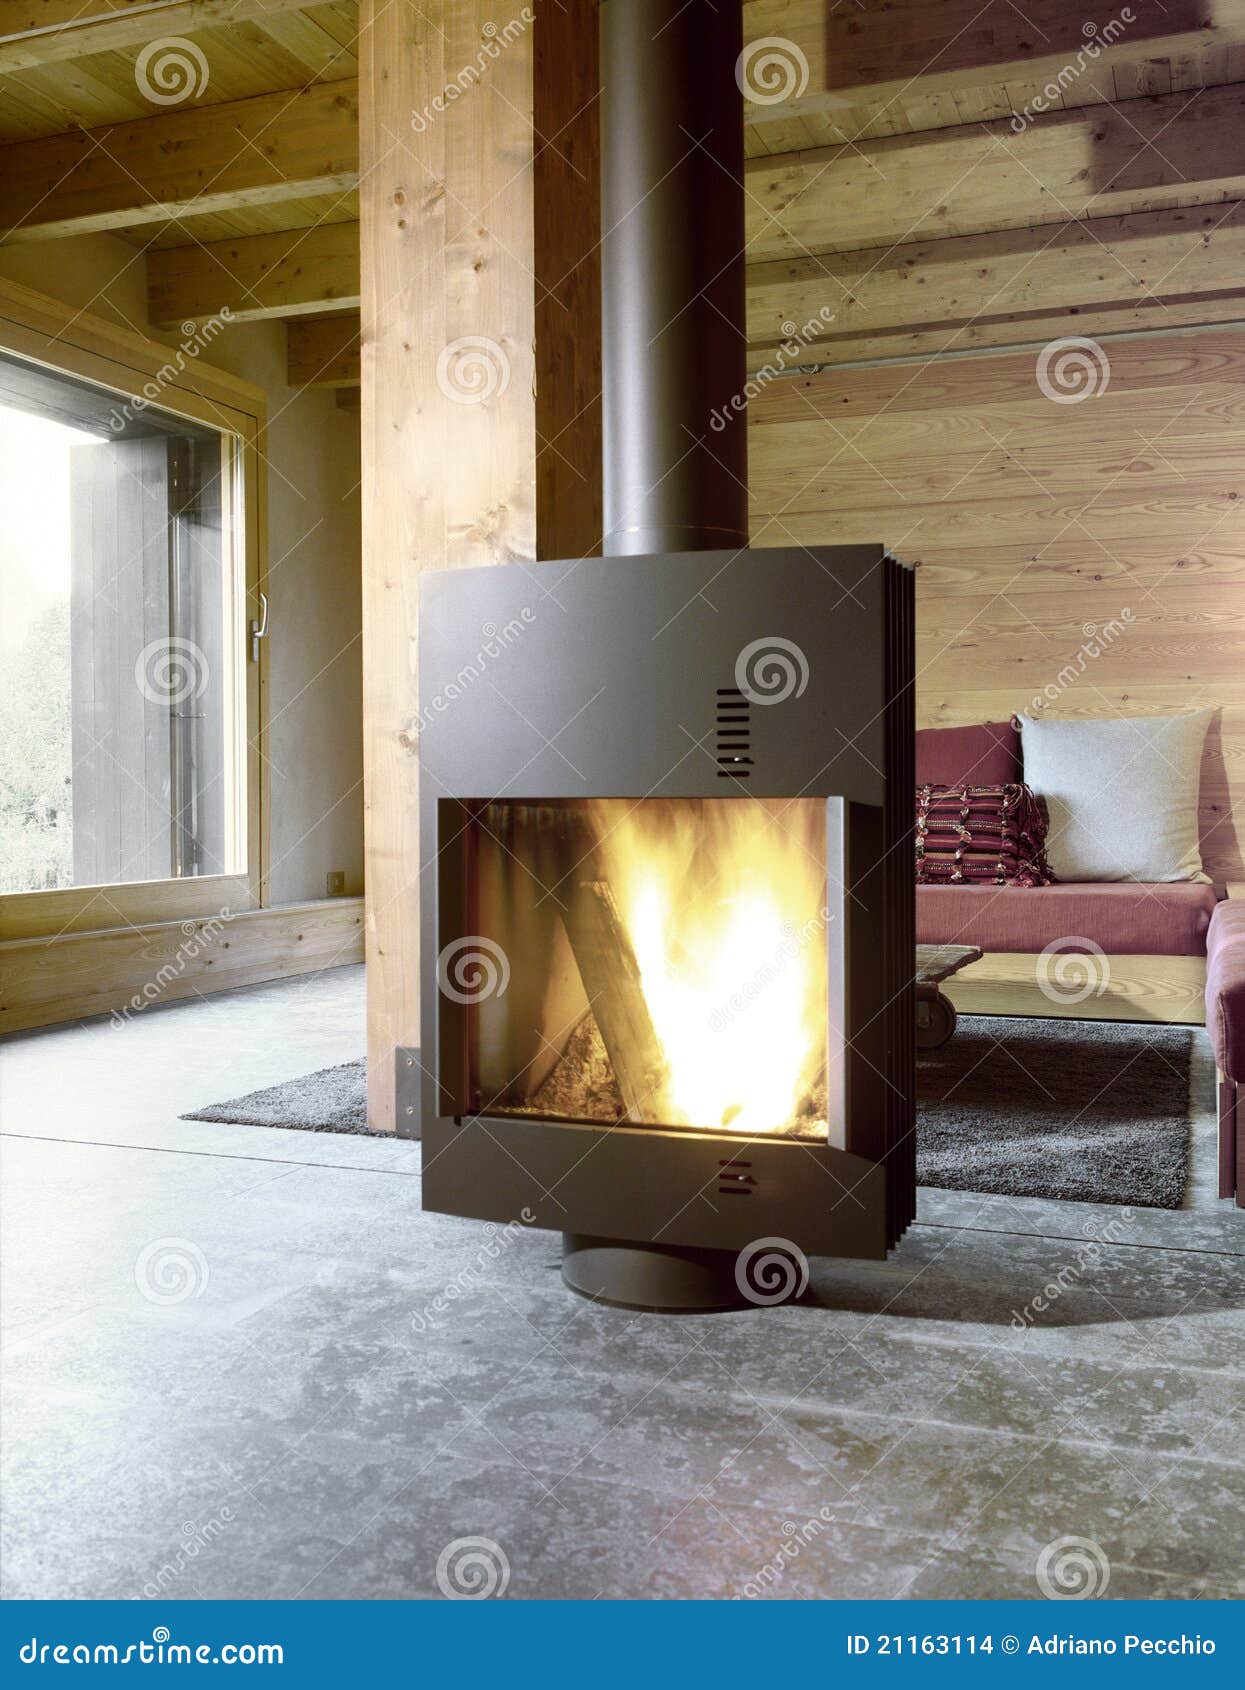 modern stove in the living room